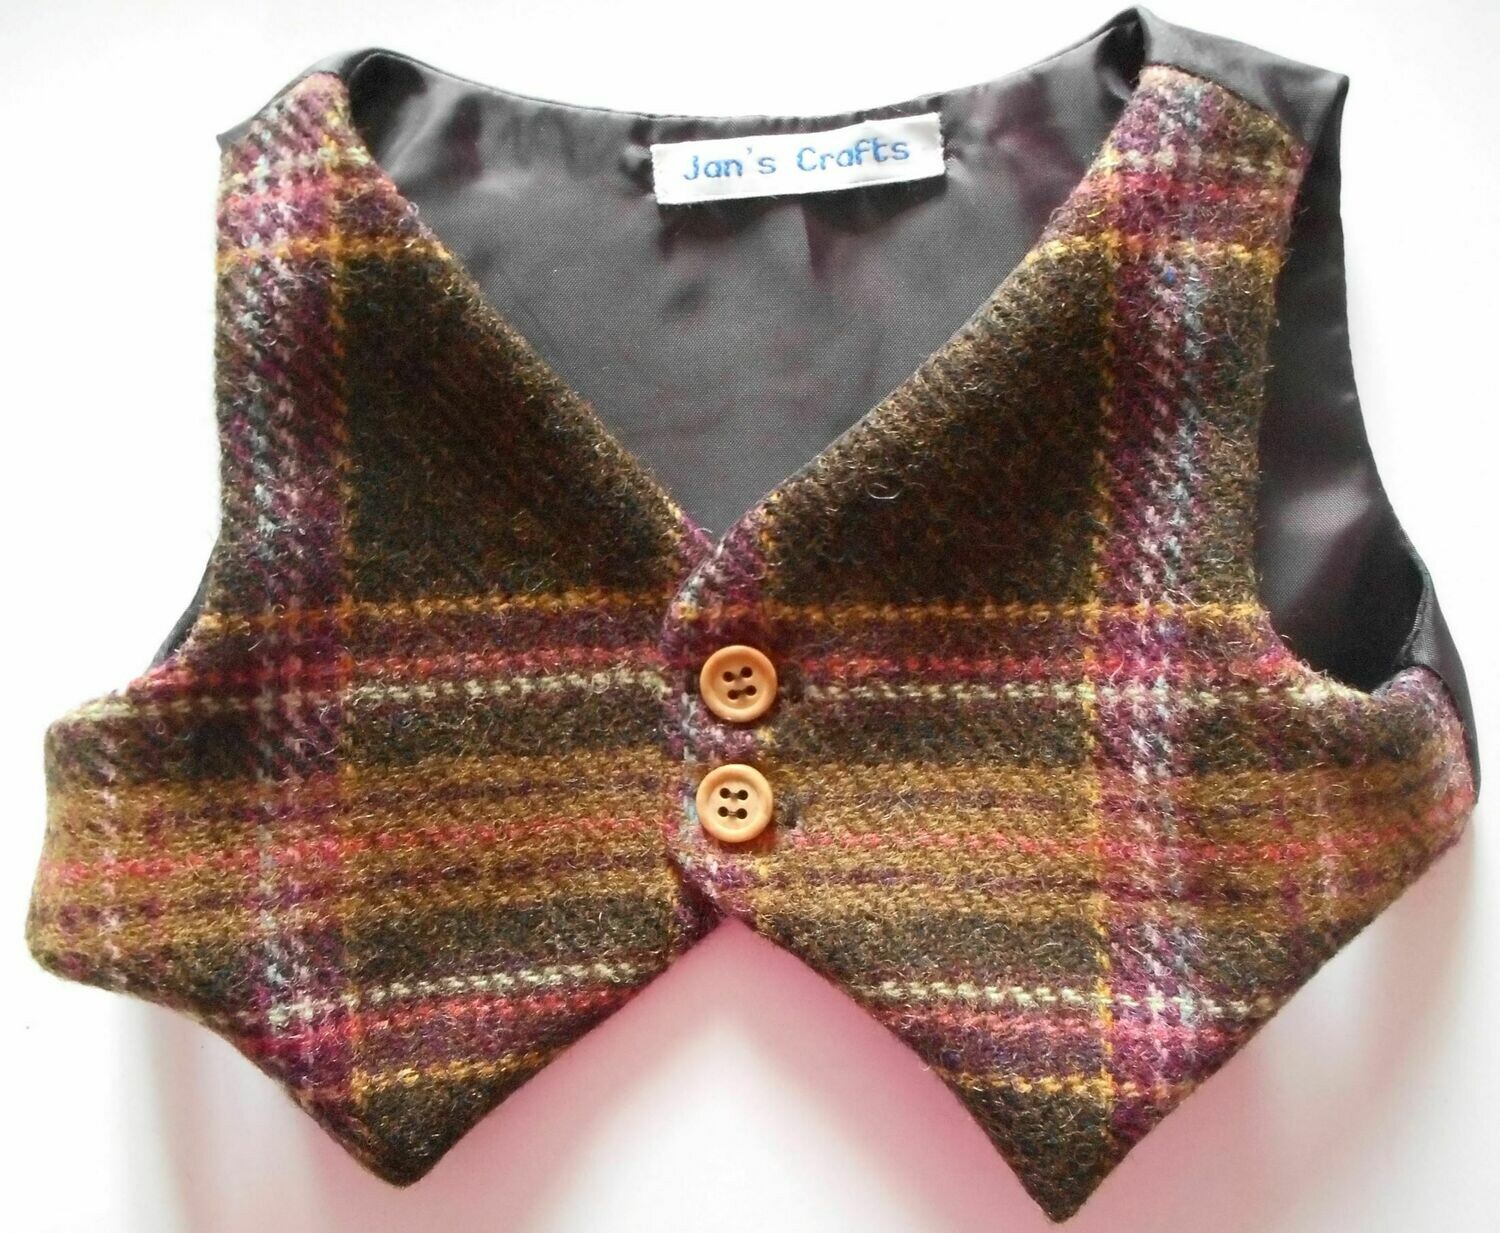 Waistcoat for bears - Brown, pink and cream check wool with plain lining